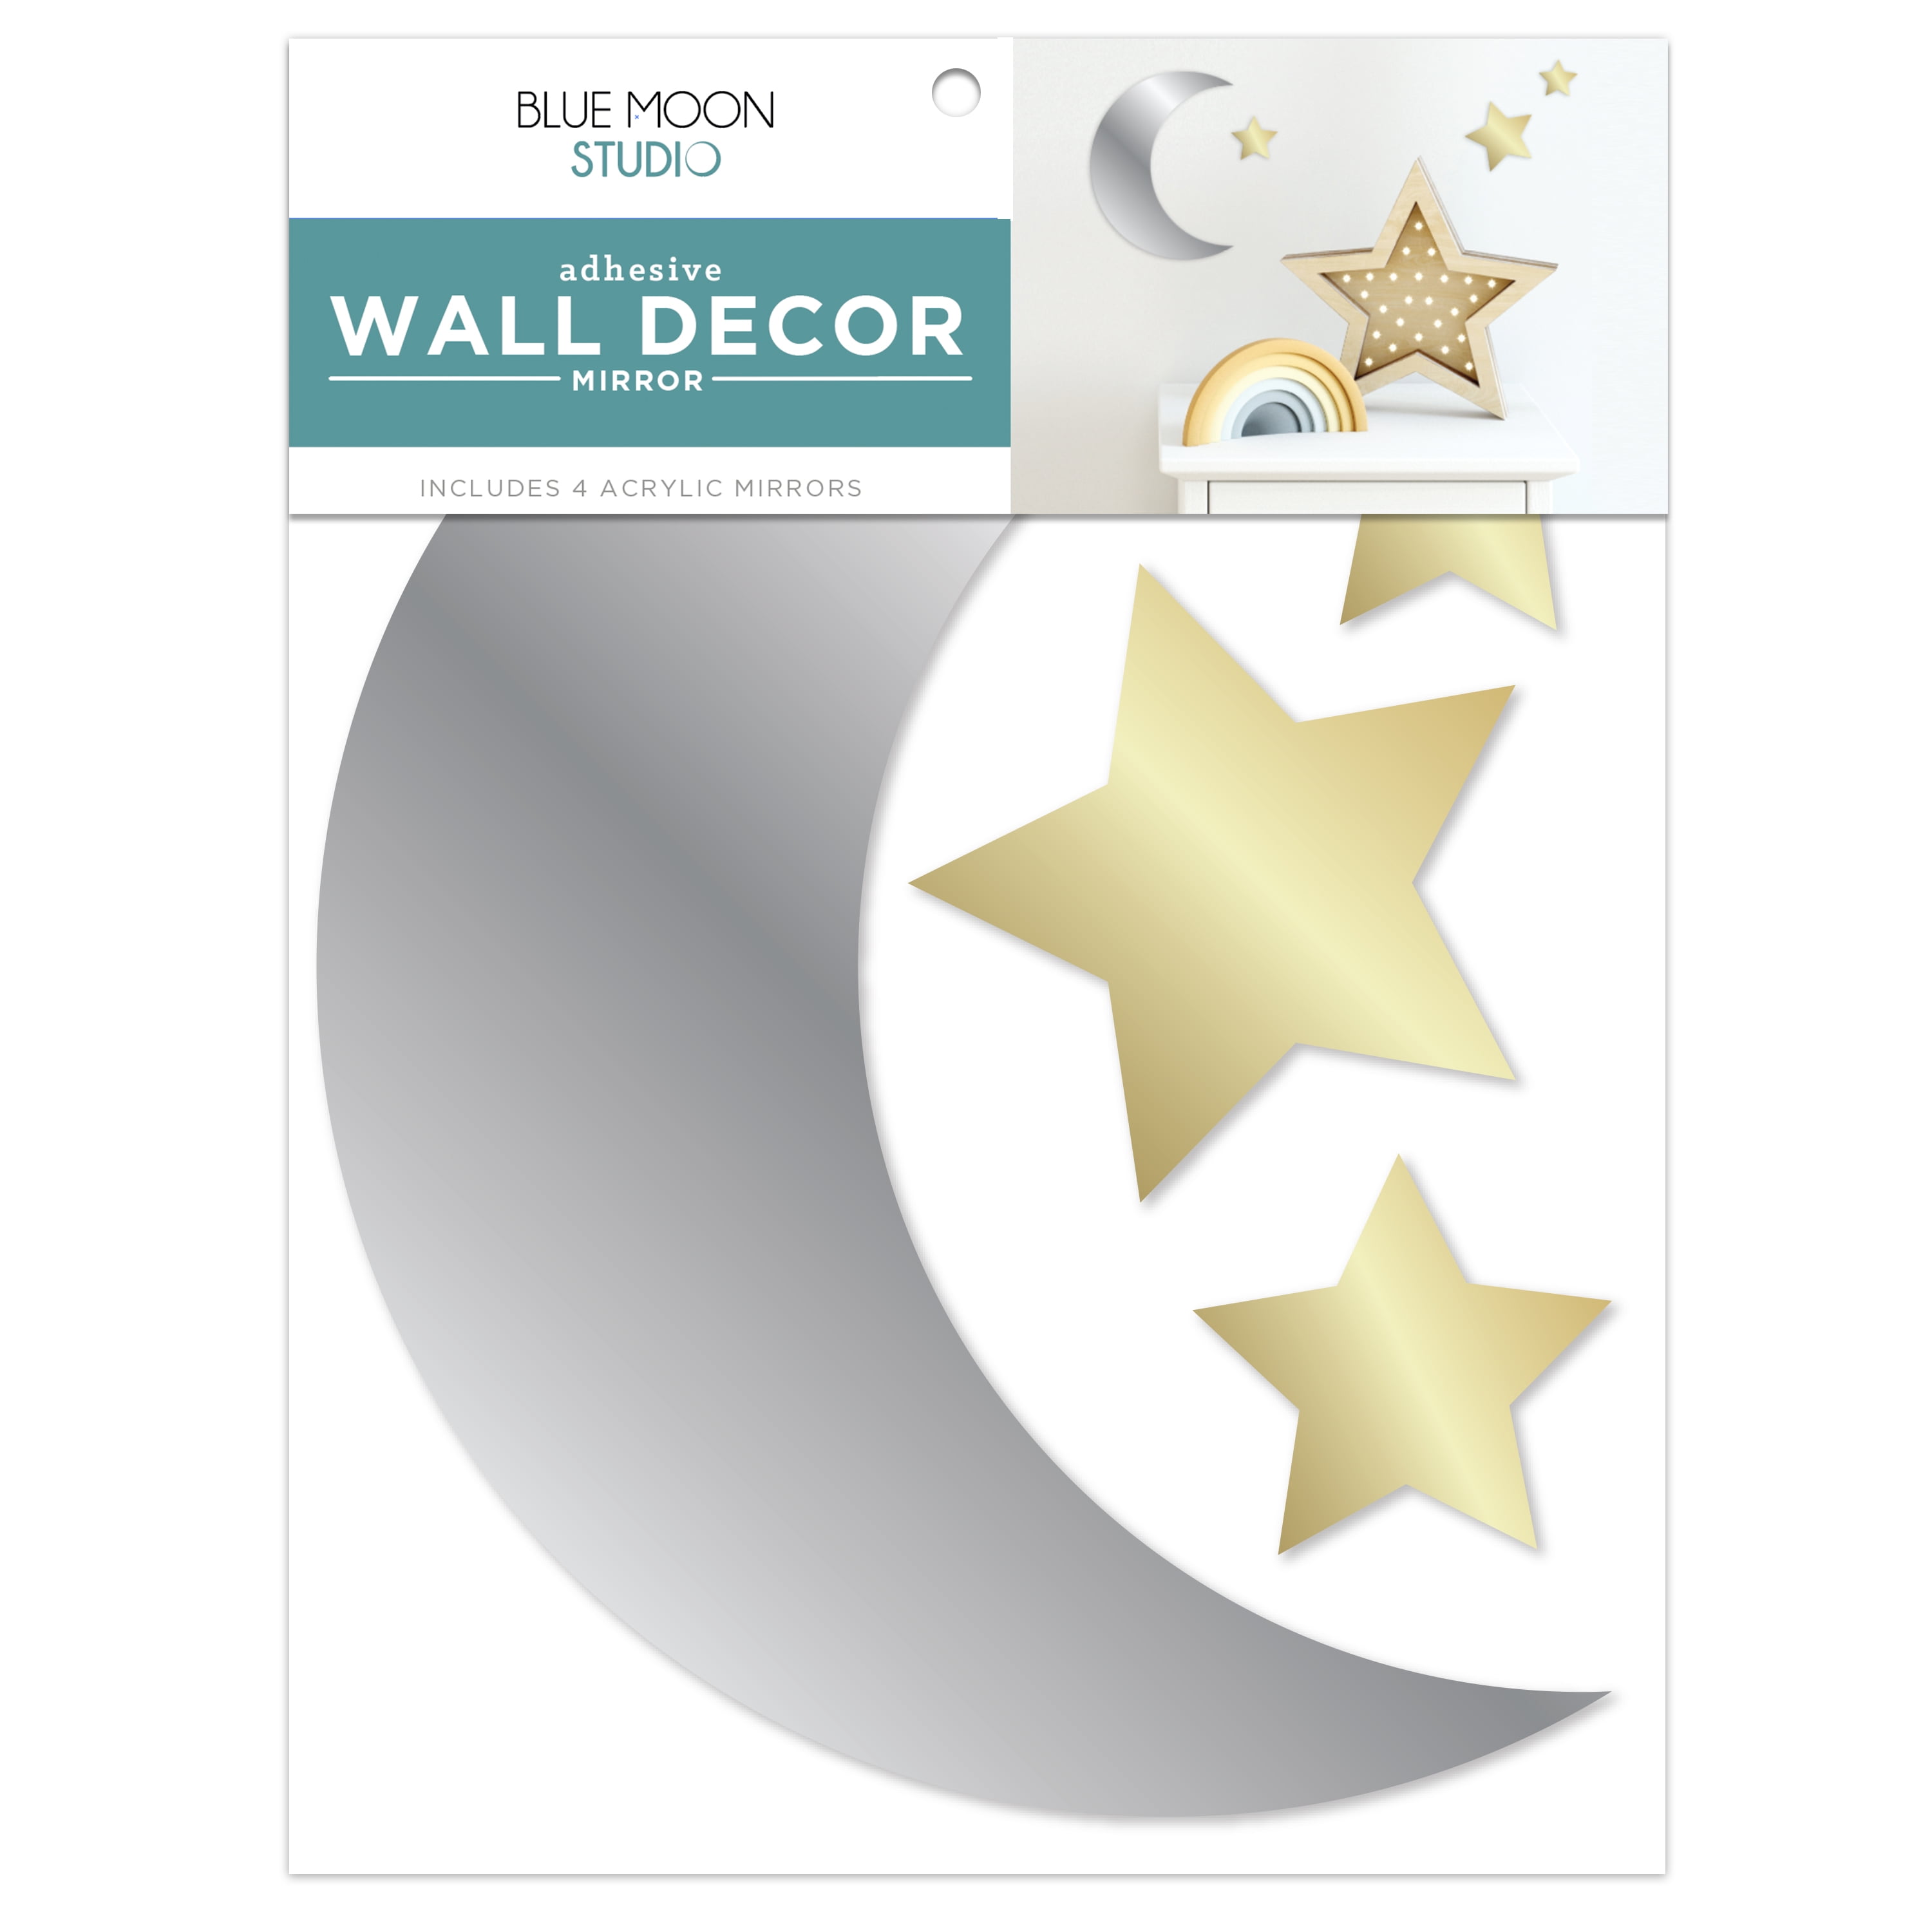 30 Sheets Count Star Stickers Gold Silver Colorful Self-Adhesive Stickers Stars, Size: 10